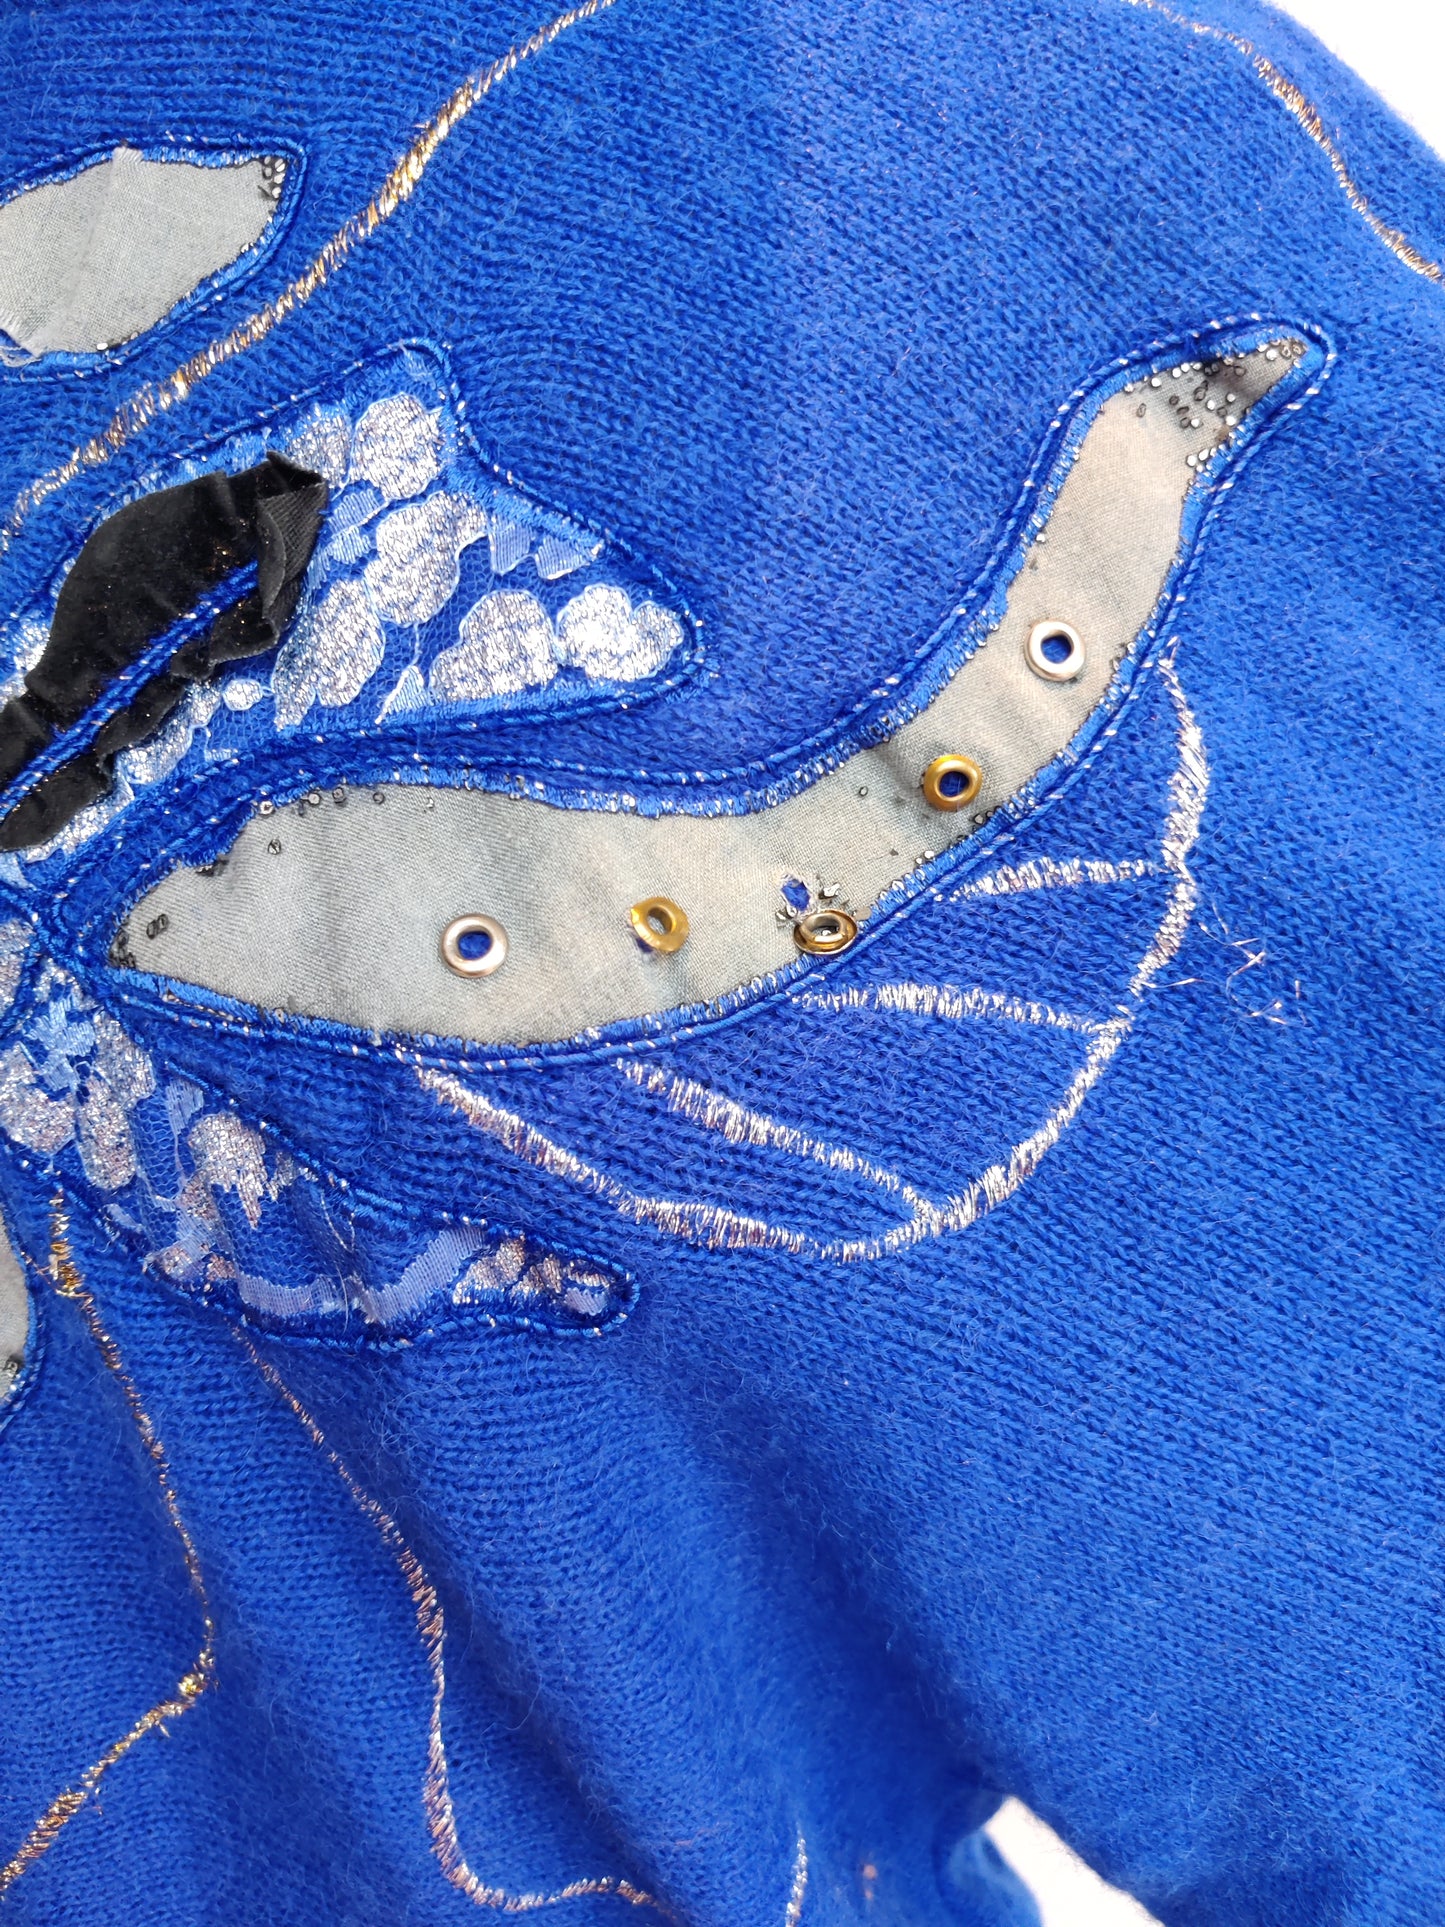 Applique detail with studs and beads